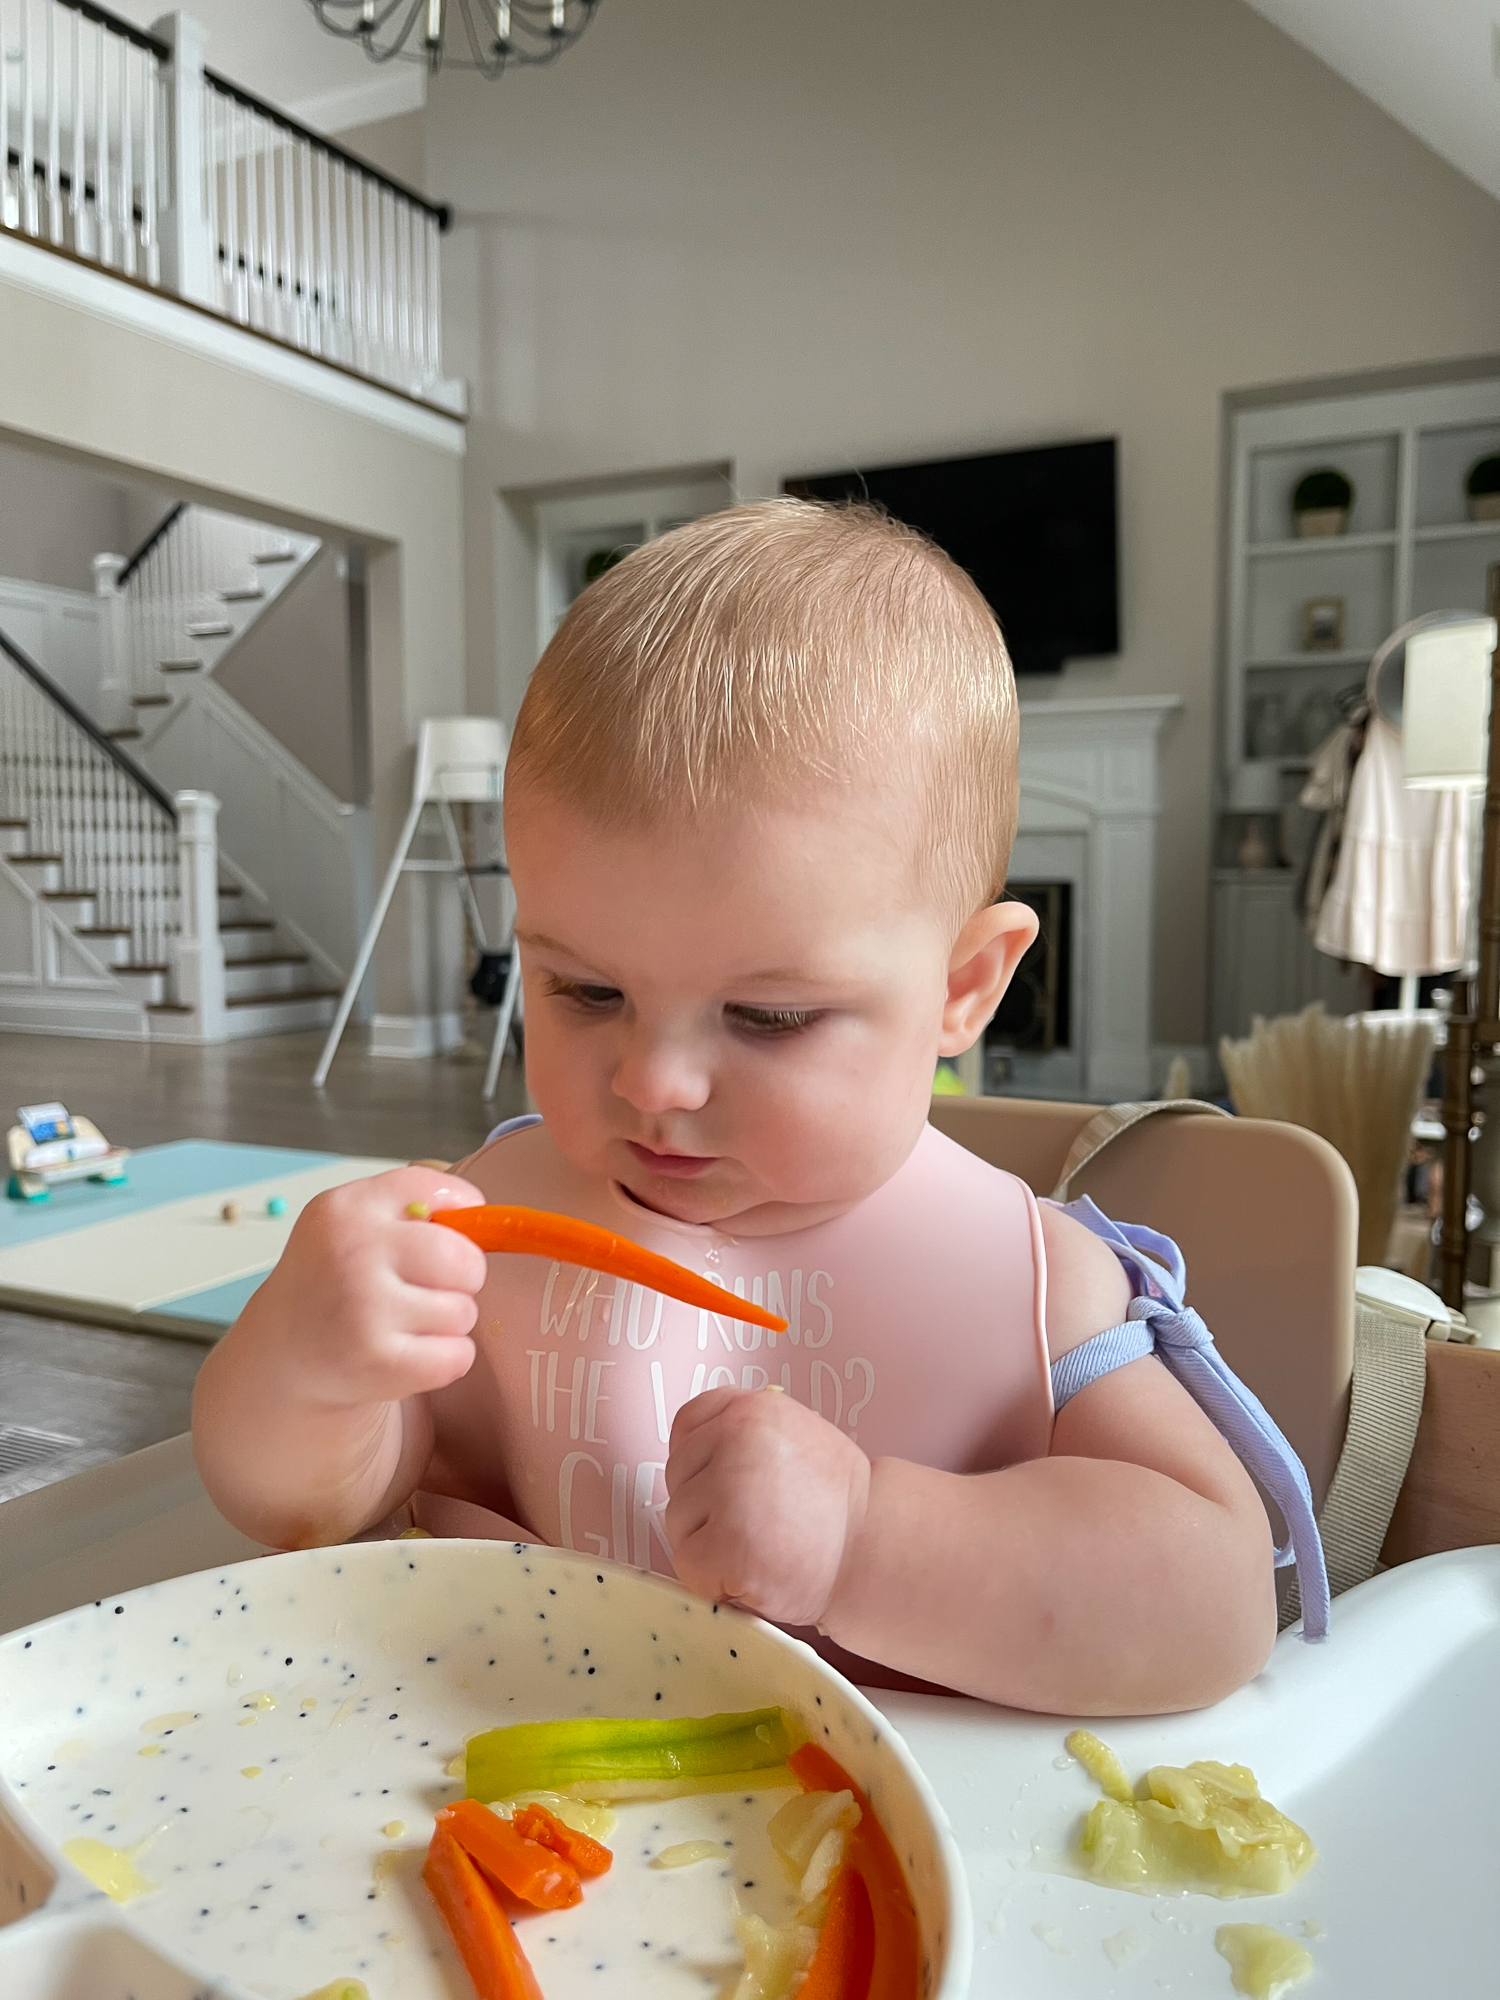 https://www.southerncurlsandpearls.com/wp-content/uploads/2021/08/baby-led-weaning-2.jpg